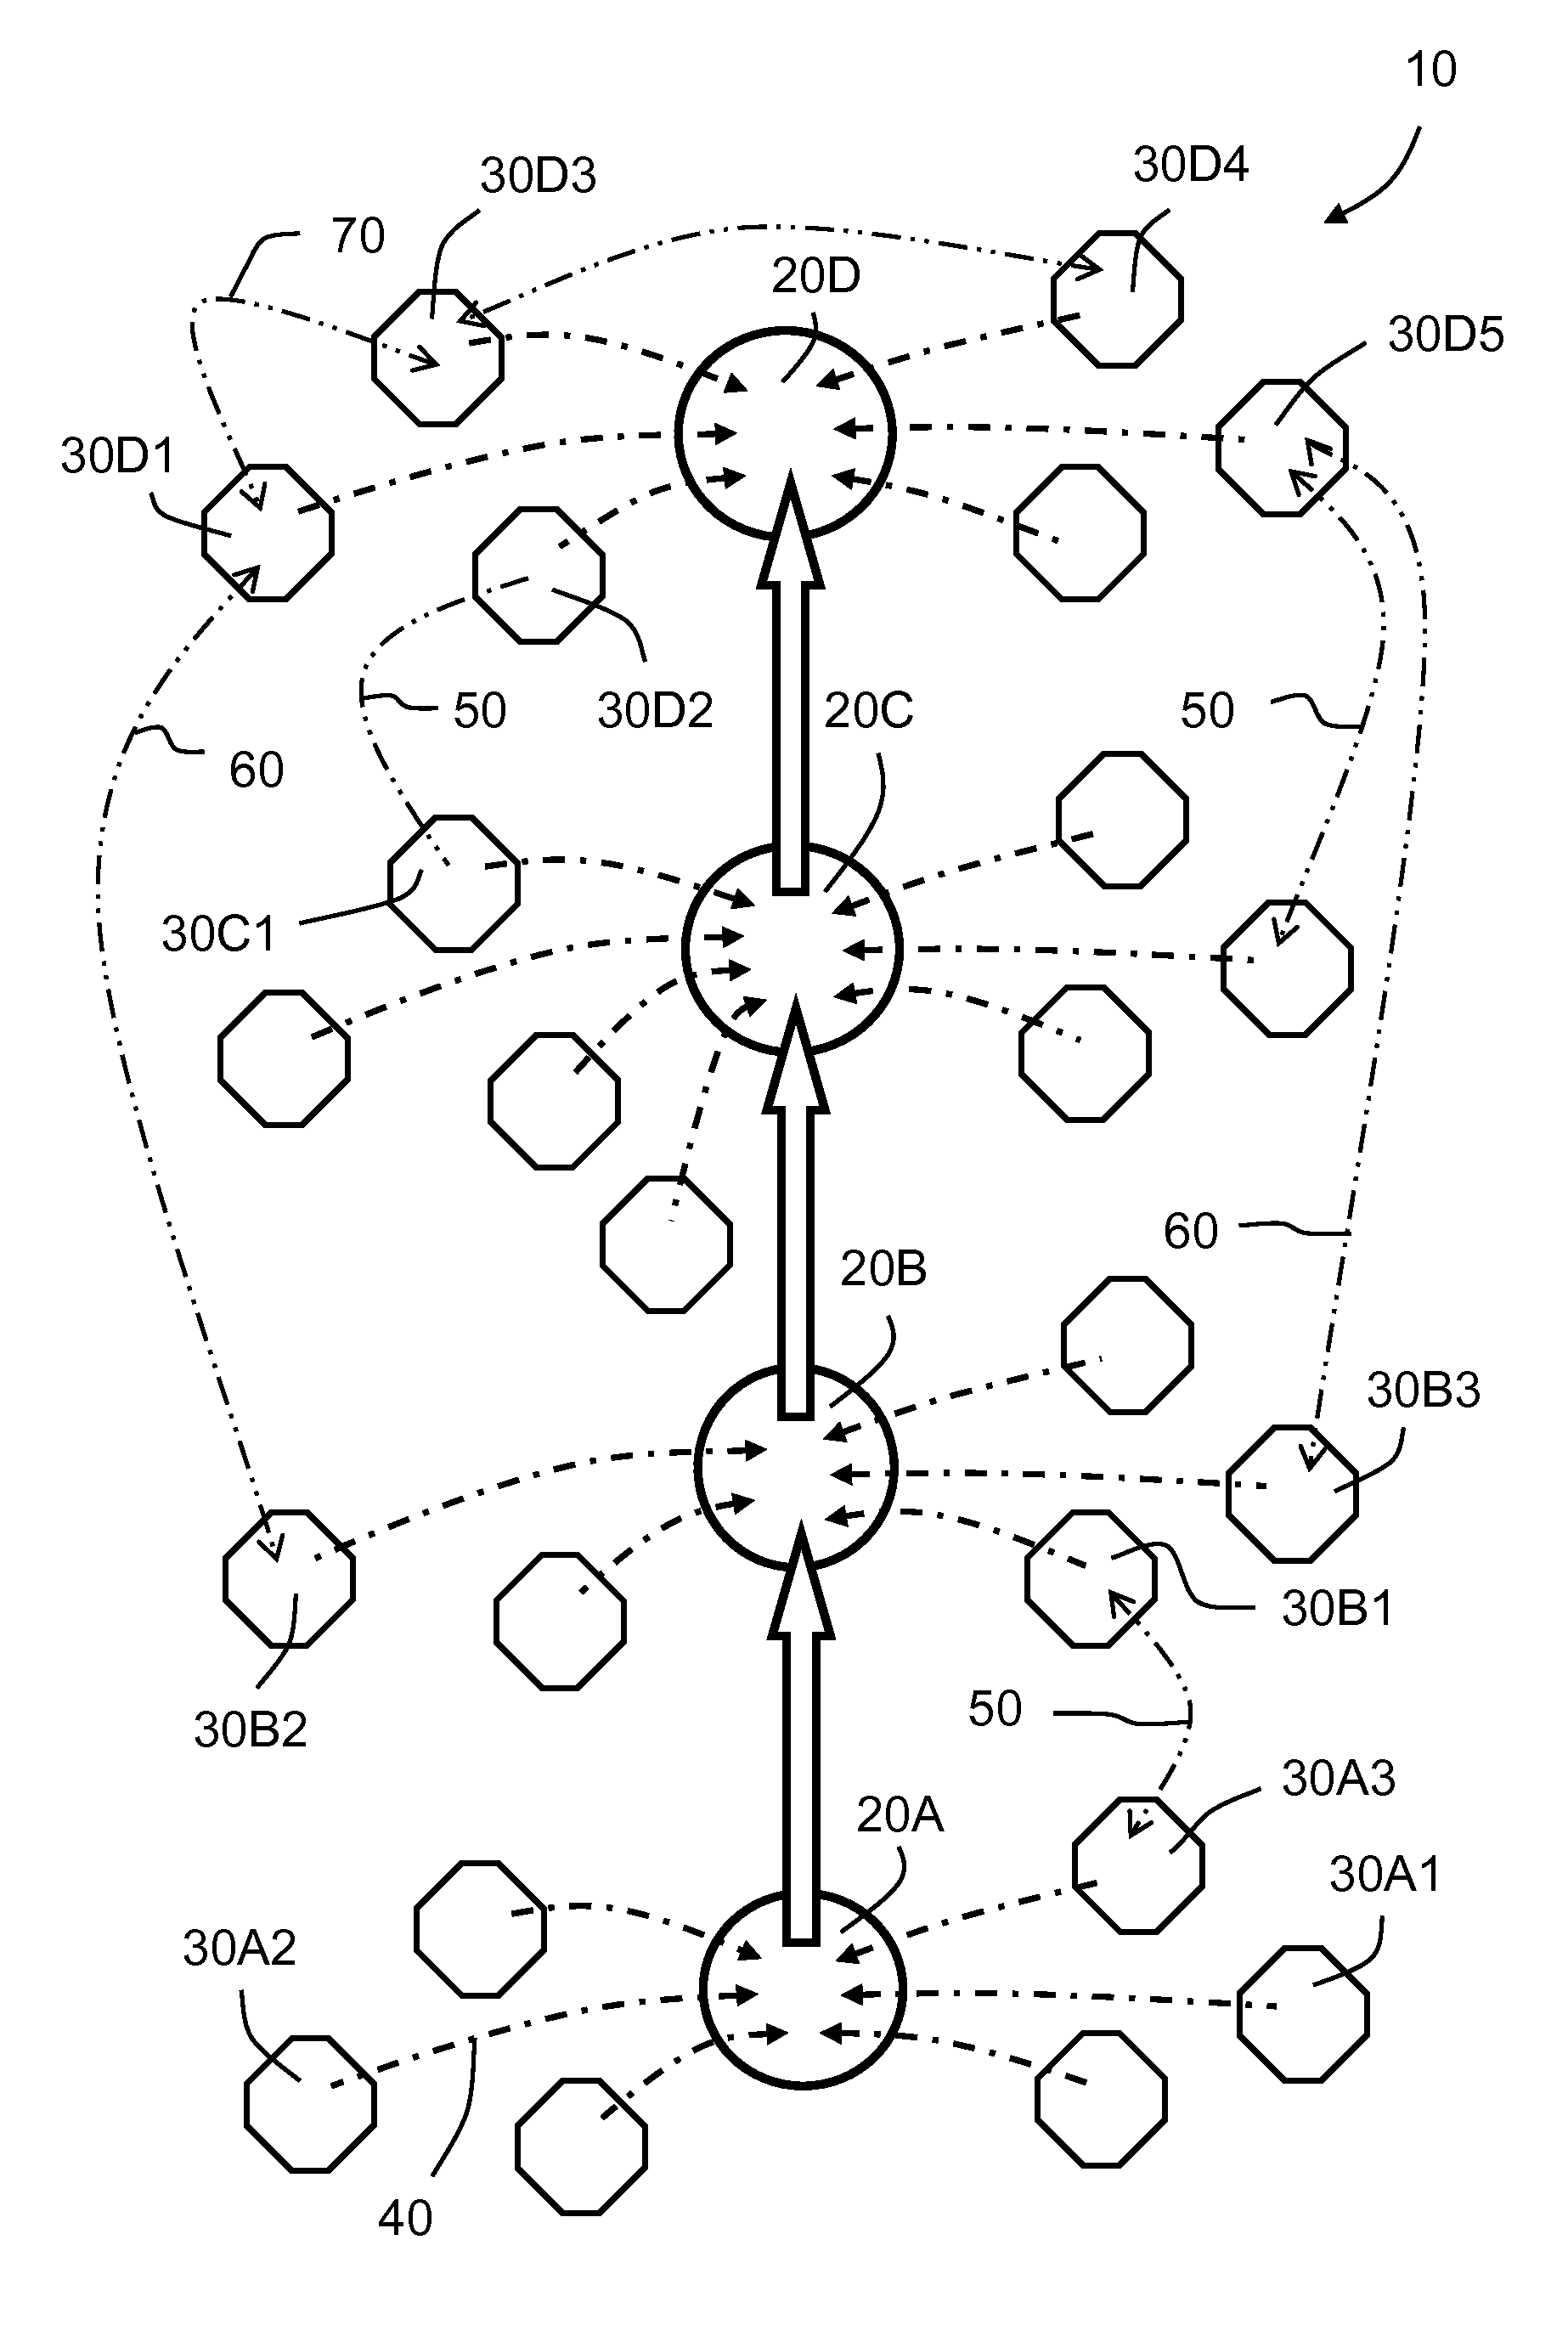 Tool for controlling complex systems